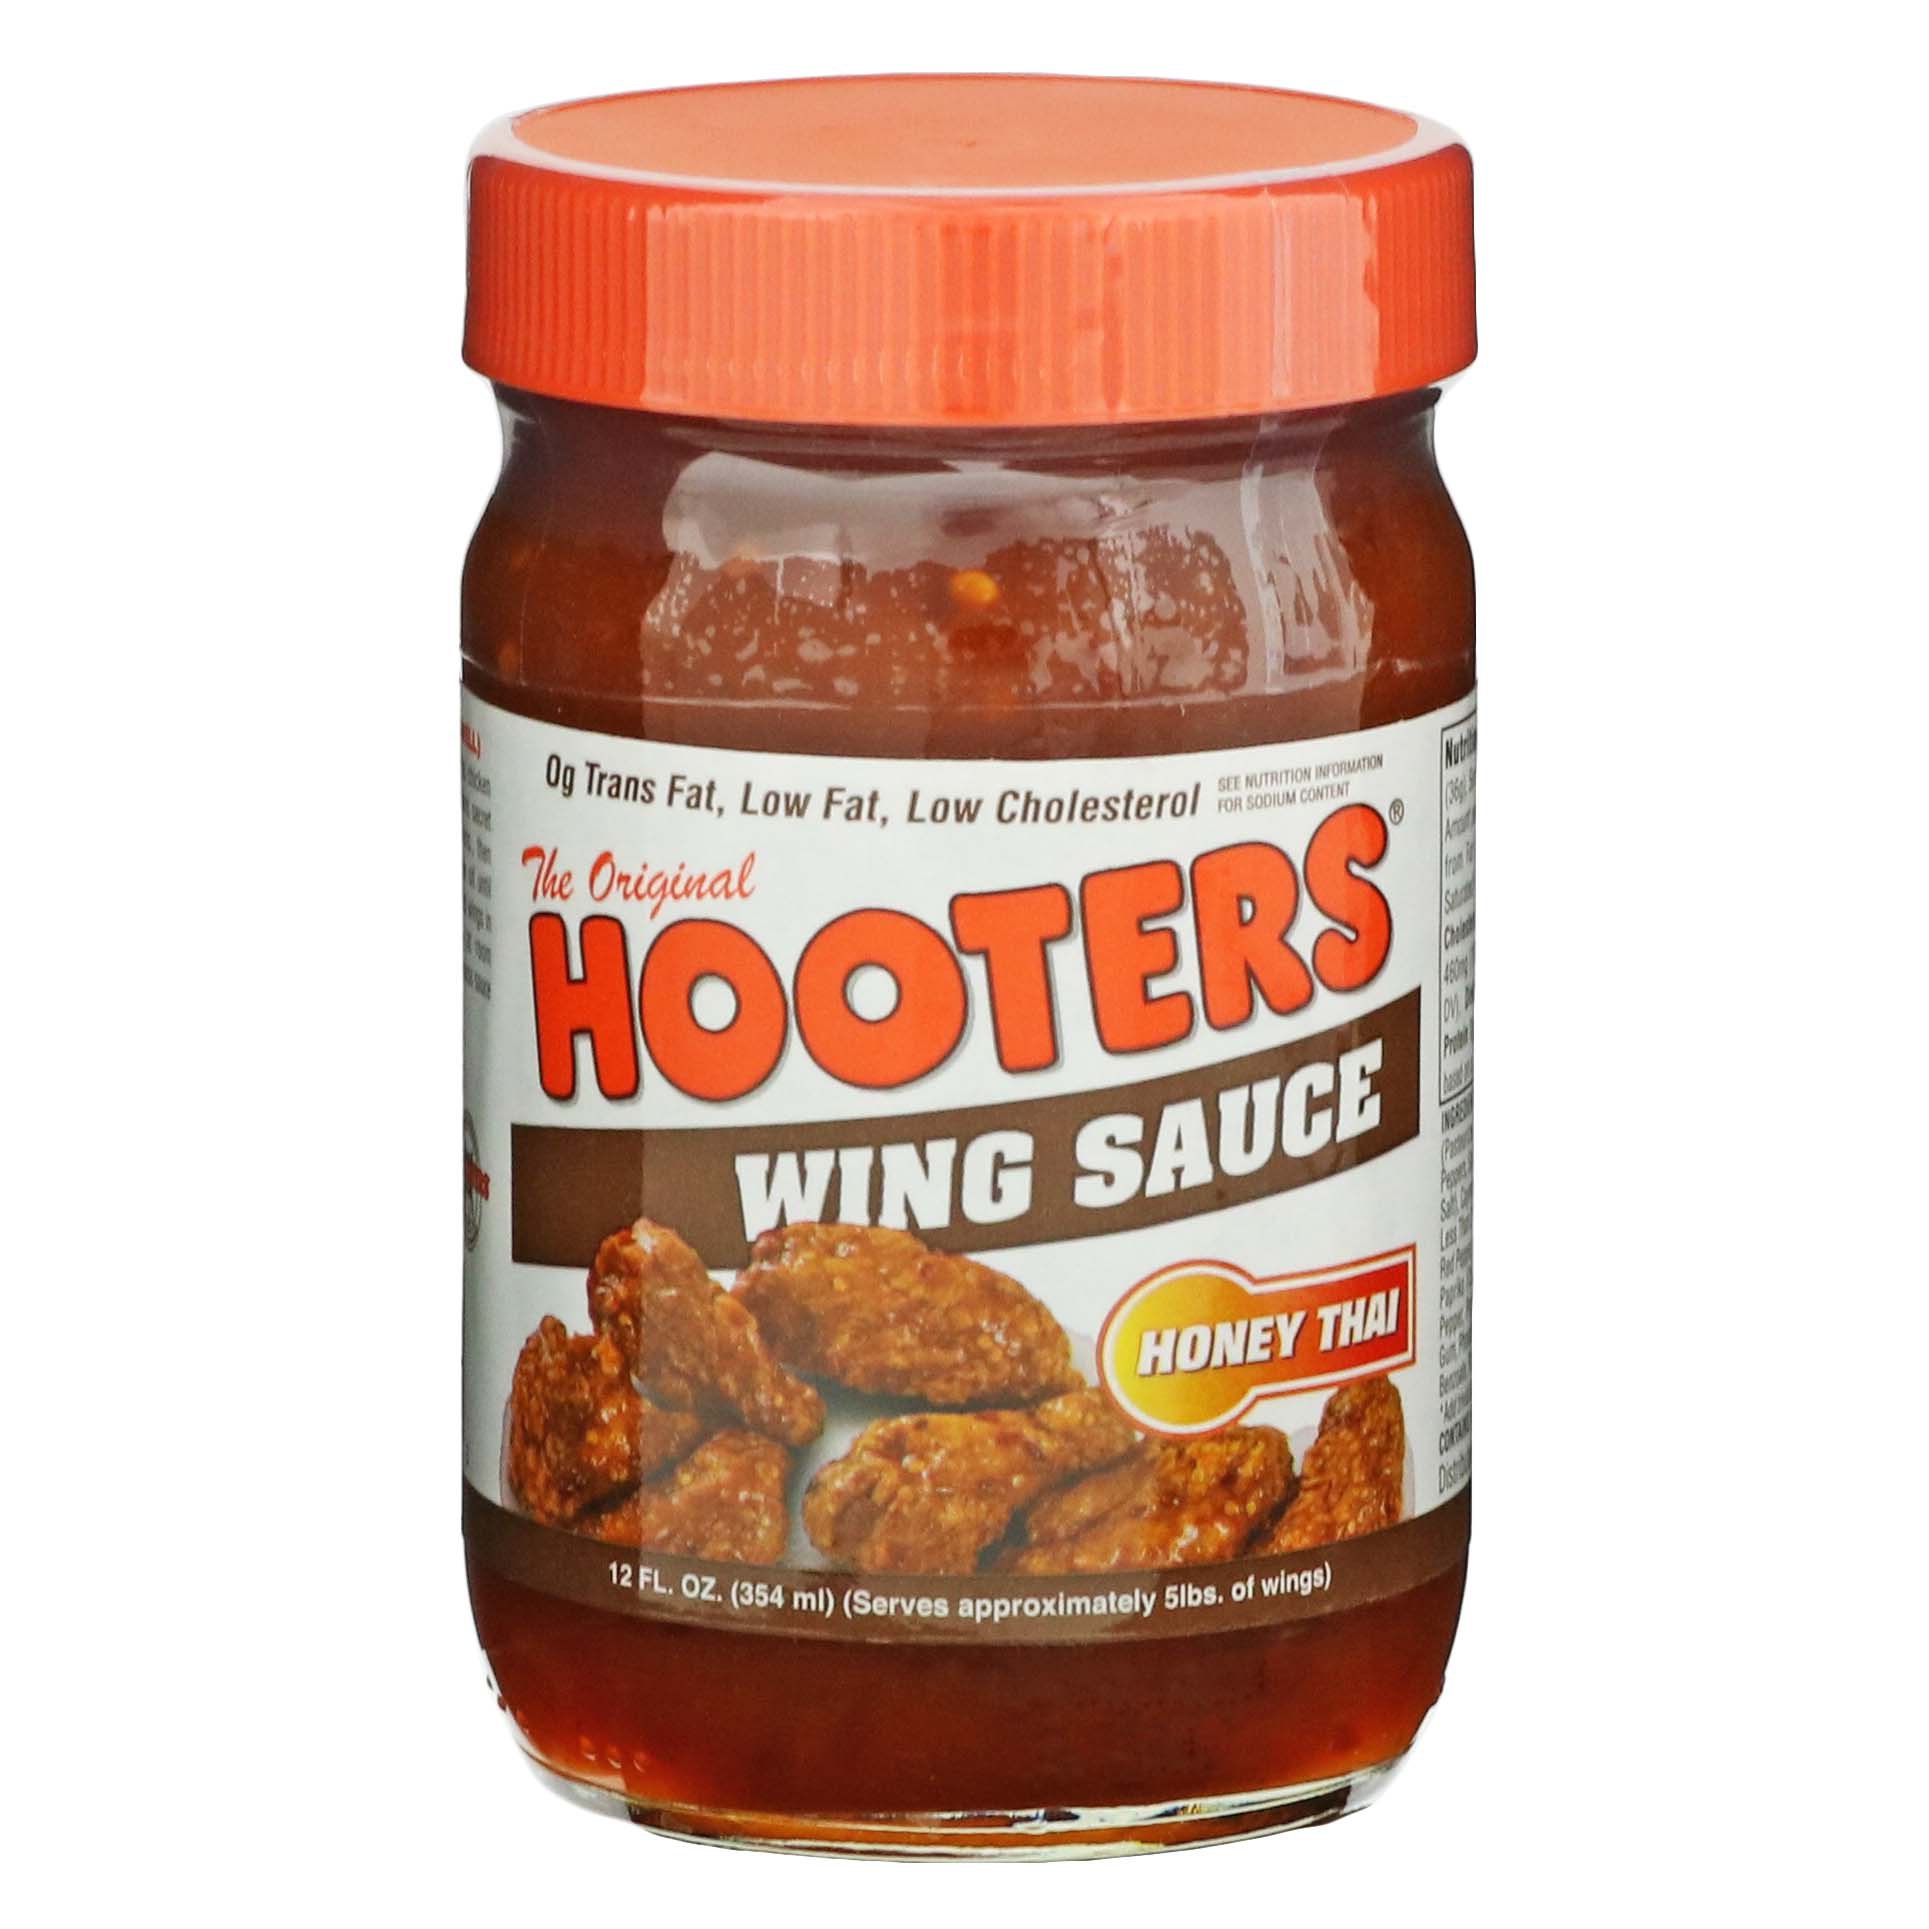 Hooters Wing Sauce Honey Thai Shop Specialty Sauces At H E B